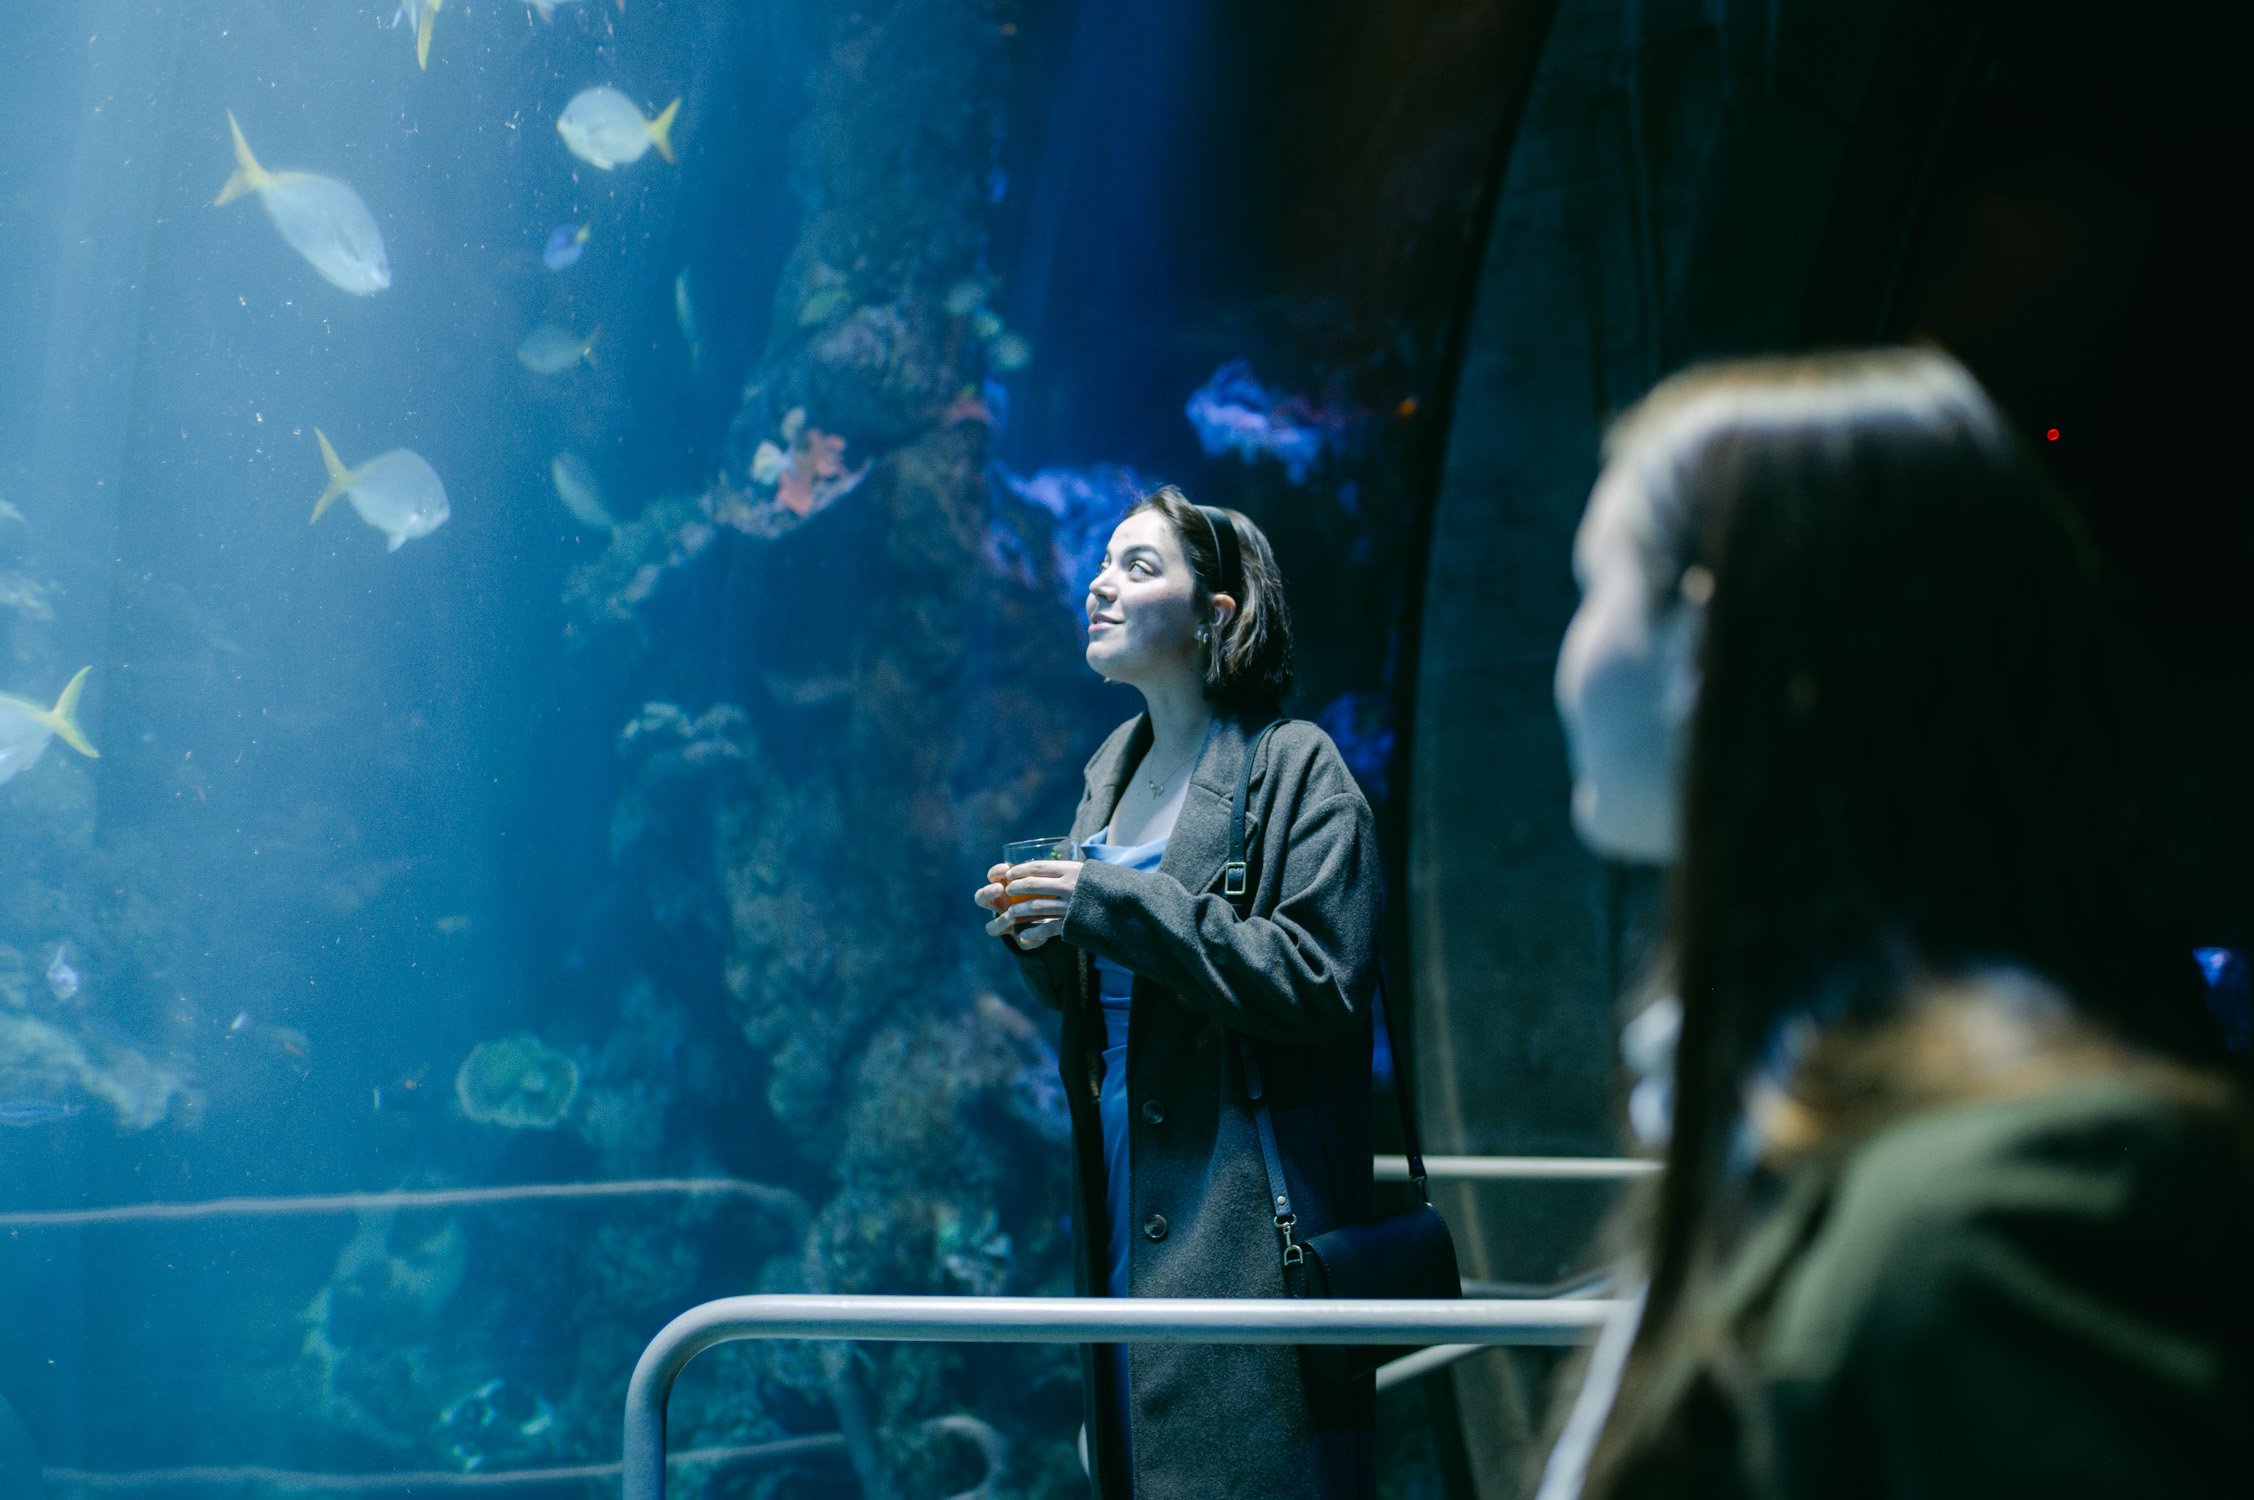 California academy of Sciences in San Francisco Wedding, photo of the wedding guest looking at the fishes in the aquarium